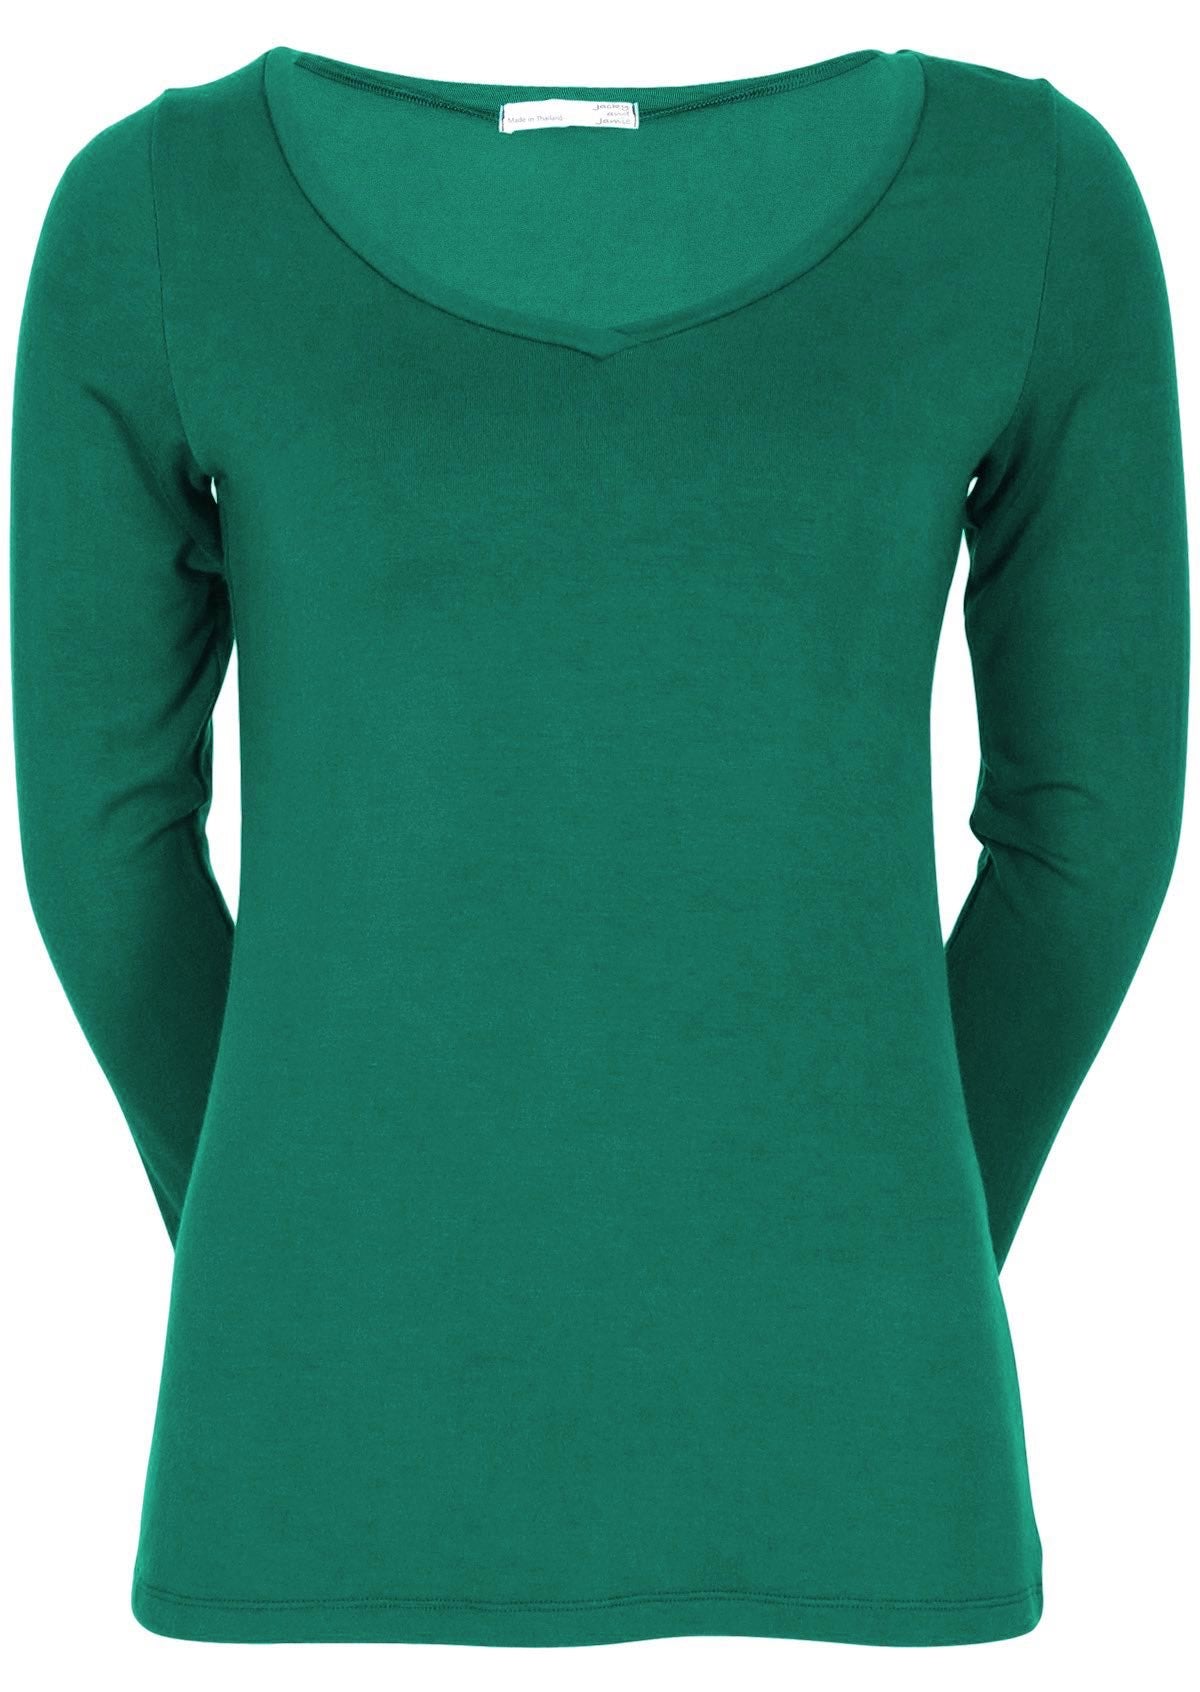 Front view of women's jade green long sleeve stretch v-neck soft rayon top.